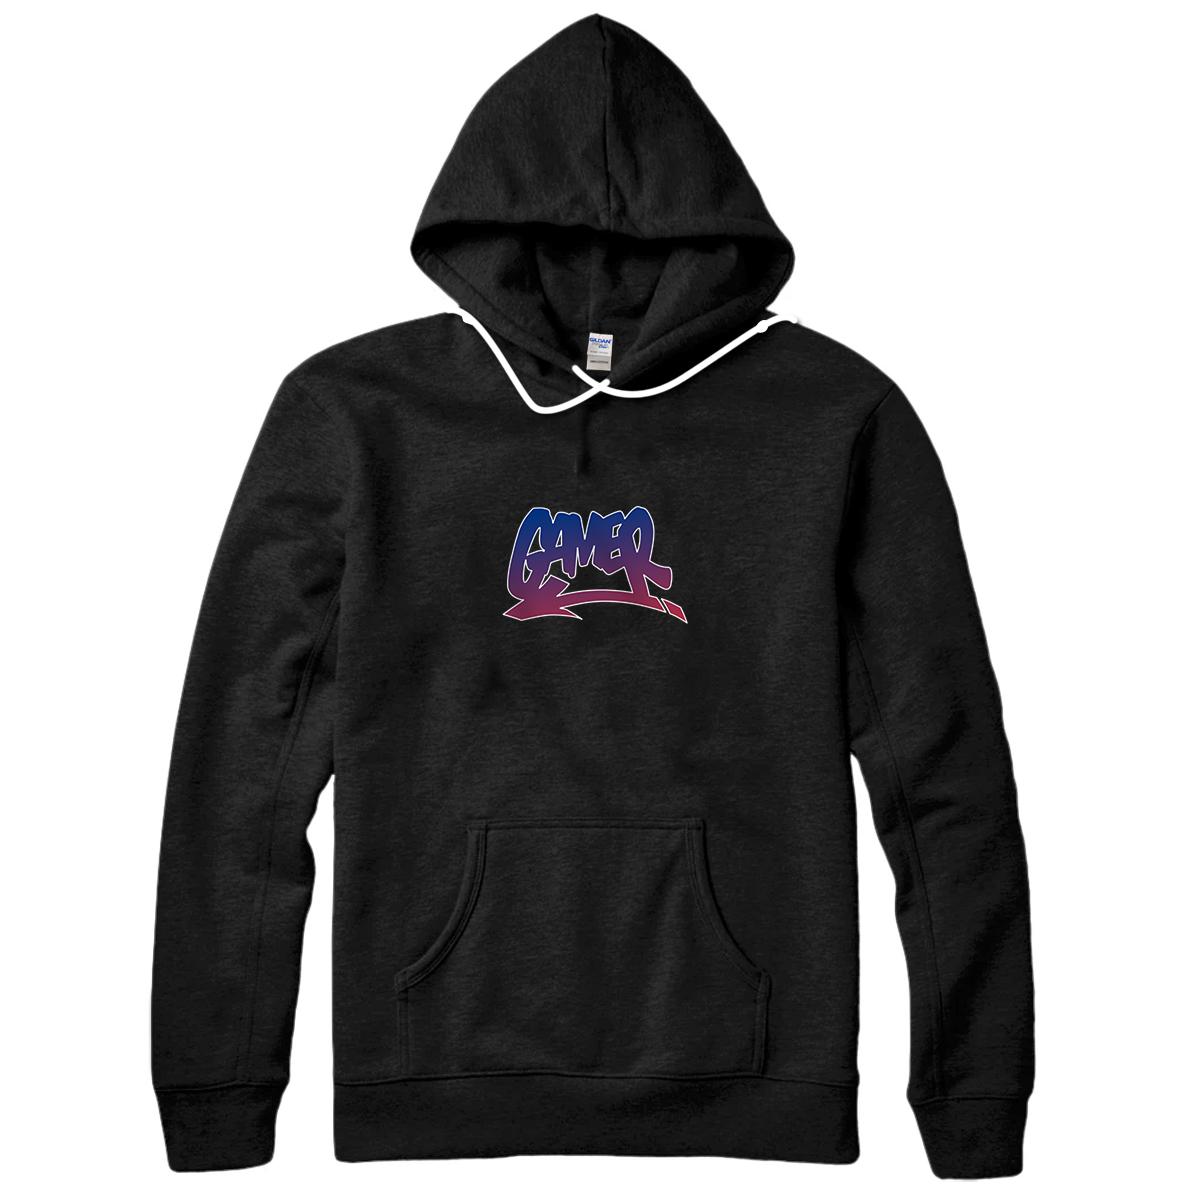 Personalized "Gamer" Graffiti Style Gradient - Street Style - Urban Wear Pullover Hoodie